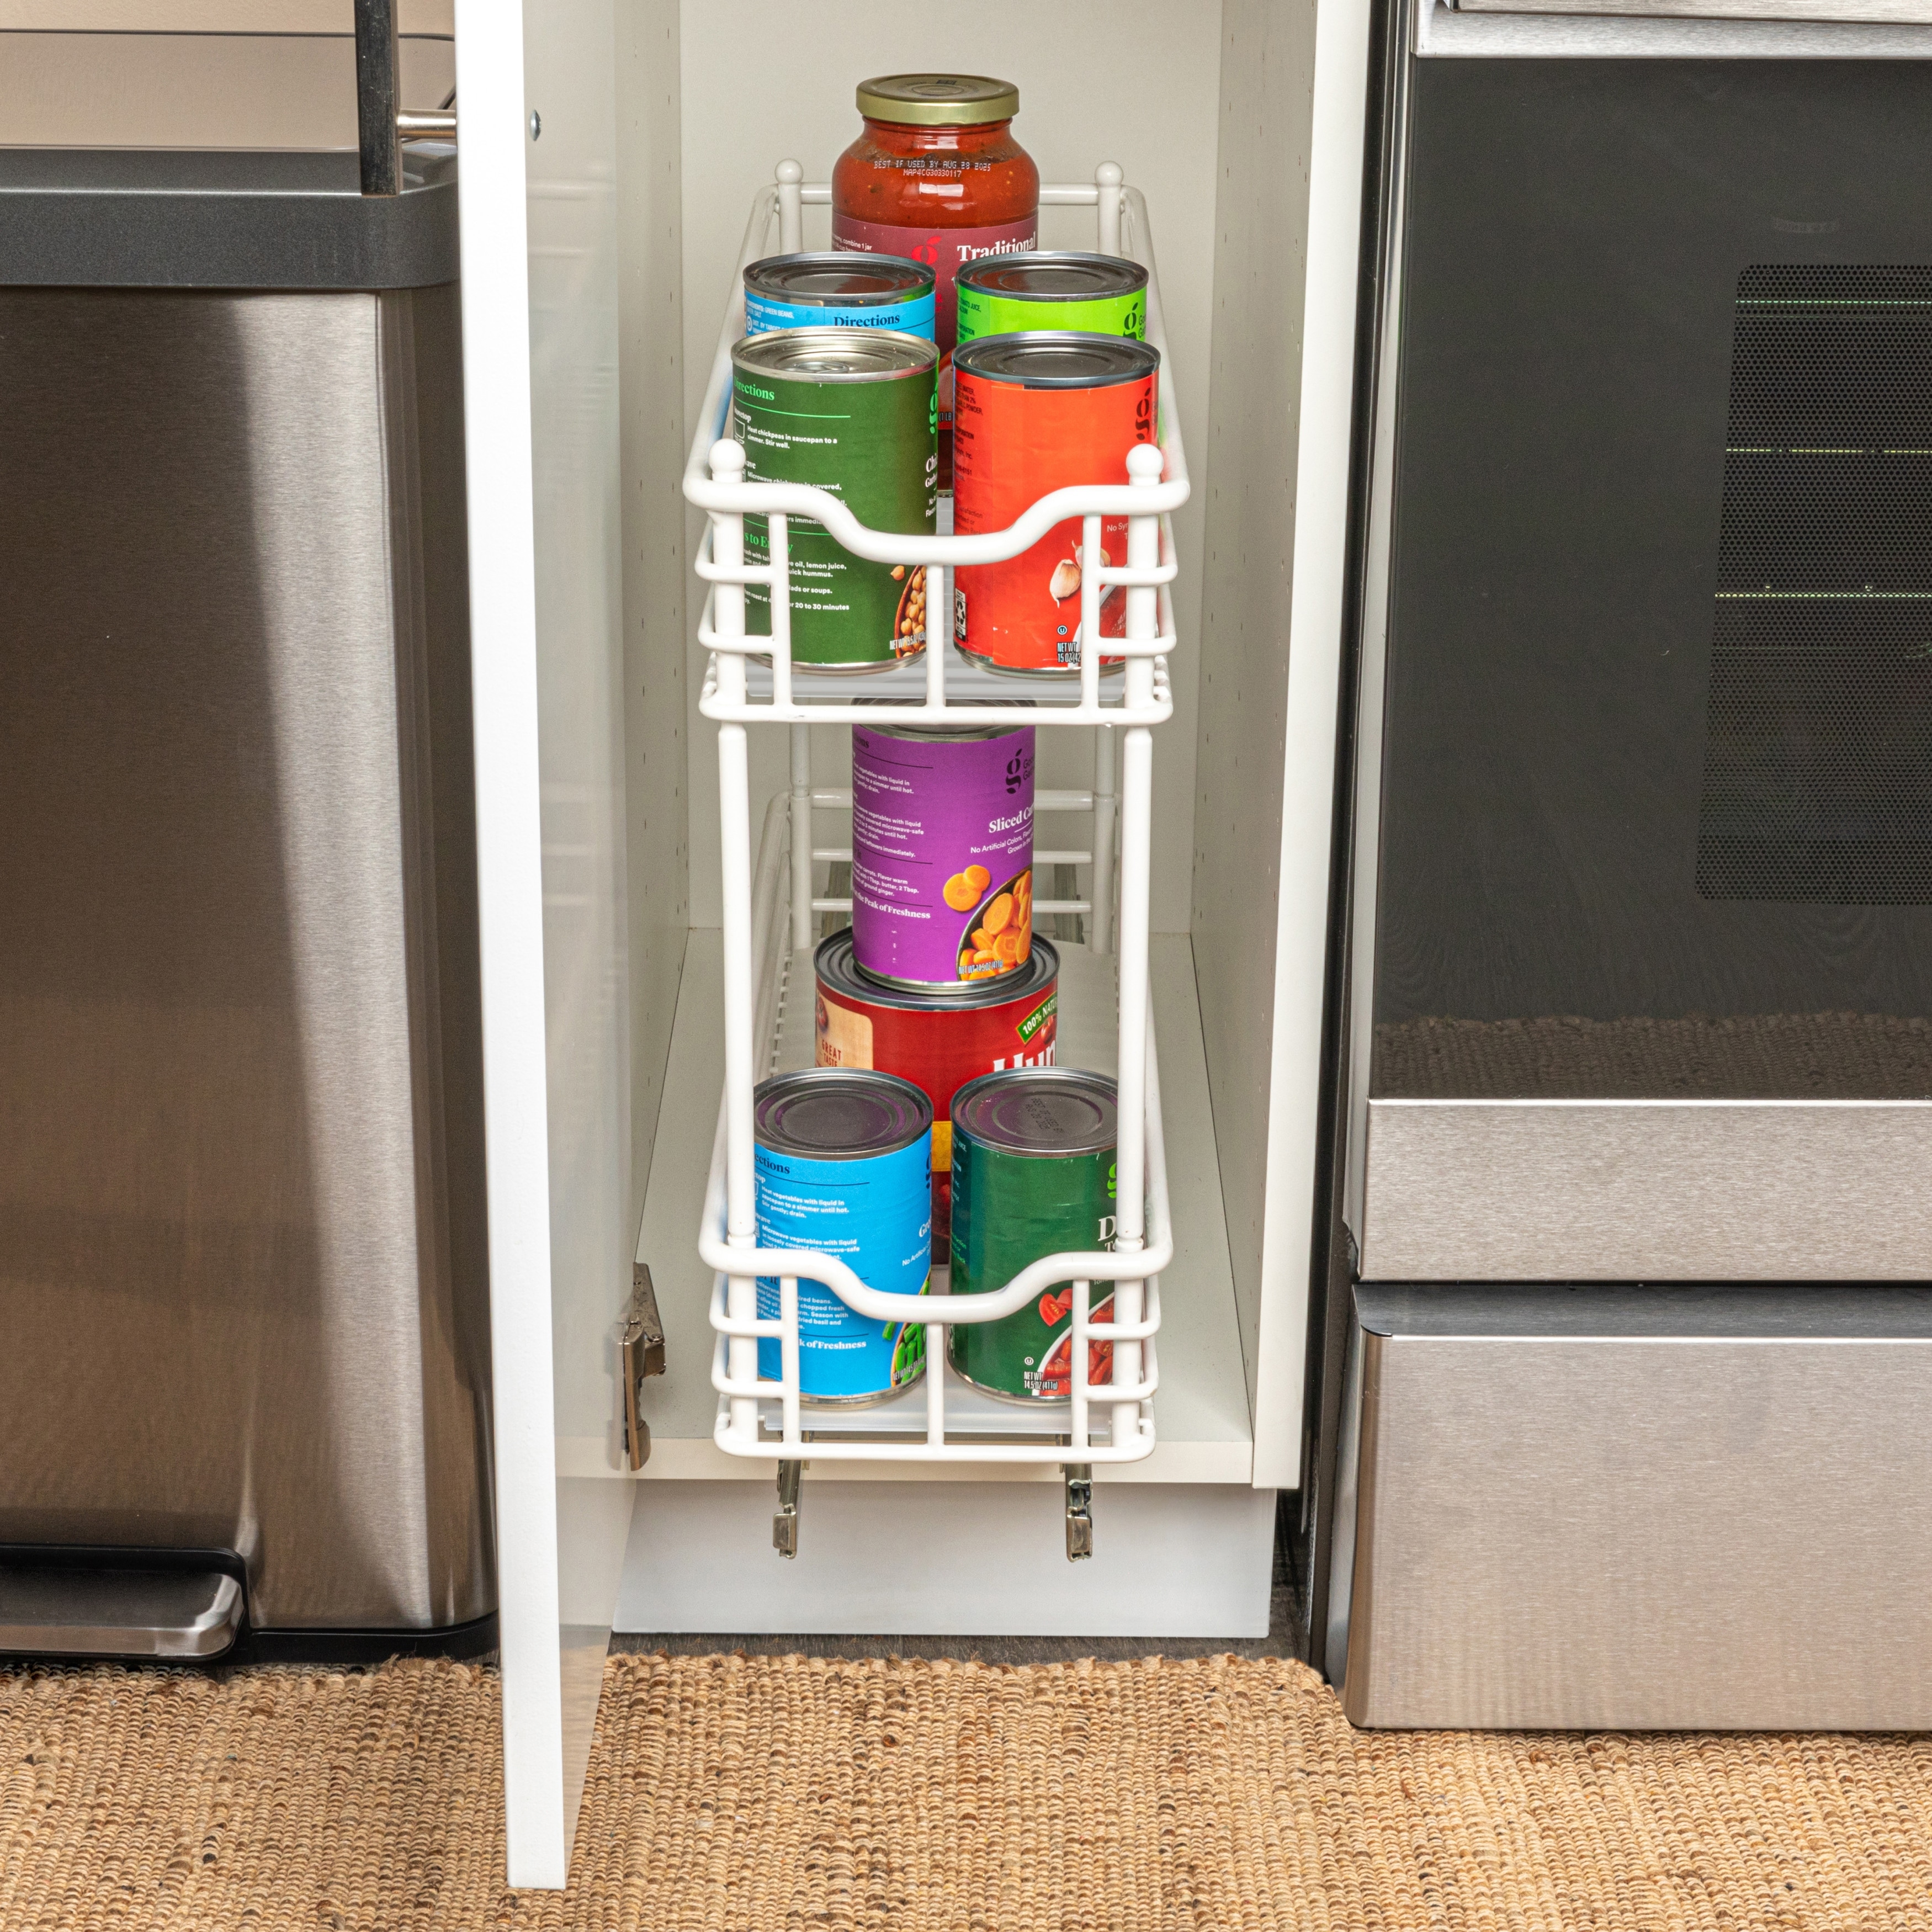  Household Essentials Narrow Sliding Cabinet Organizer, Two Tier  Chrome Organizer, Chrome, Great for Slim Cabinets in Kitchen, Bathroom and  More : Home & Kitchen